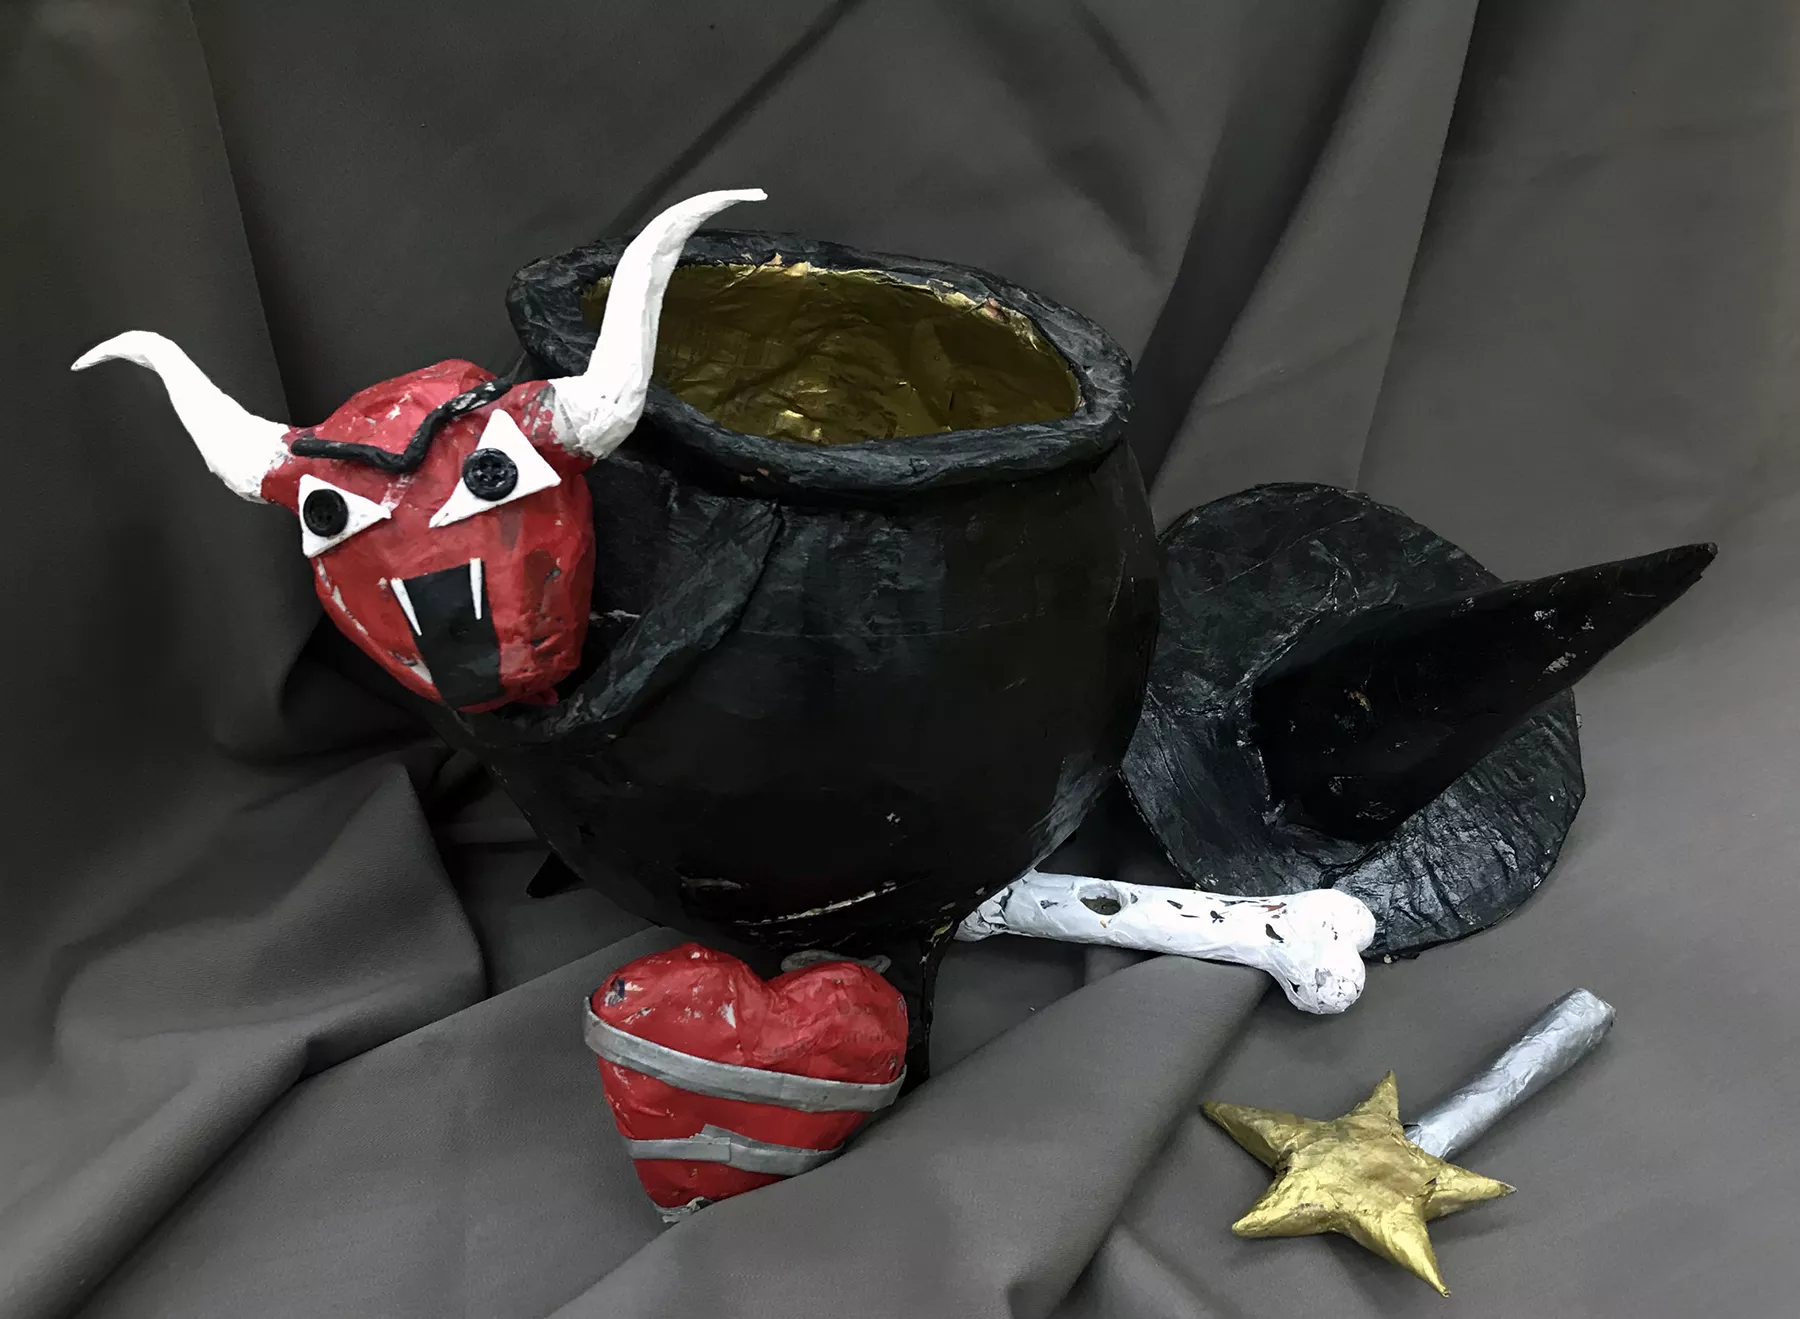 Cristian Valenzuela The Cauldron of Evil, 2022 The paper-mache form was created in an "Art & Reading" class and inspired by the strange creatures from the original Grimm's Brothers fairy tales. The white horned head of a sinister red faced bull is fixed to a black cauldron. Surrounding the cauldron is a red heart wrapped in silver stripes, a silver wand tipped with a golden star, a white bone, and a witches pointed hat.  Paper-Mache, 19” x 19” x 14”